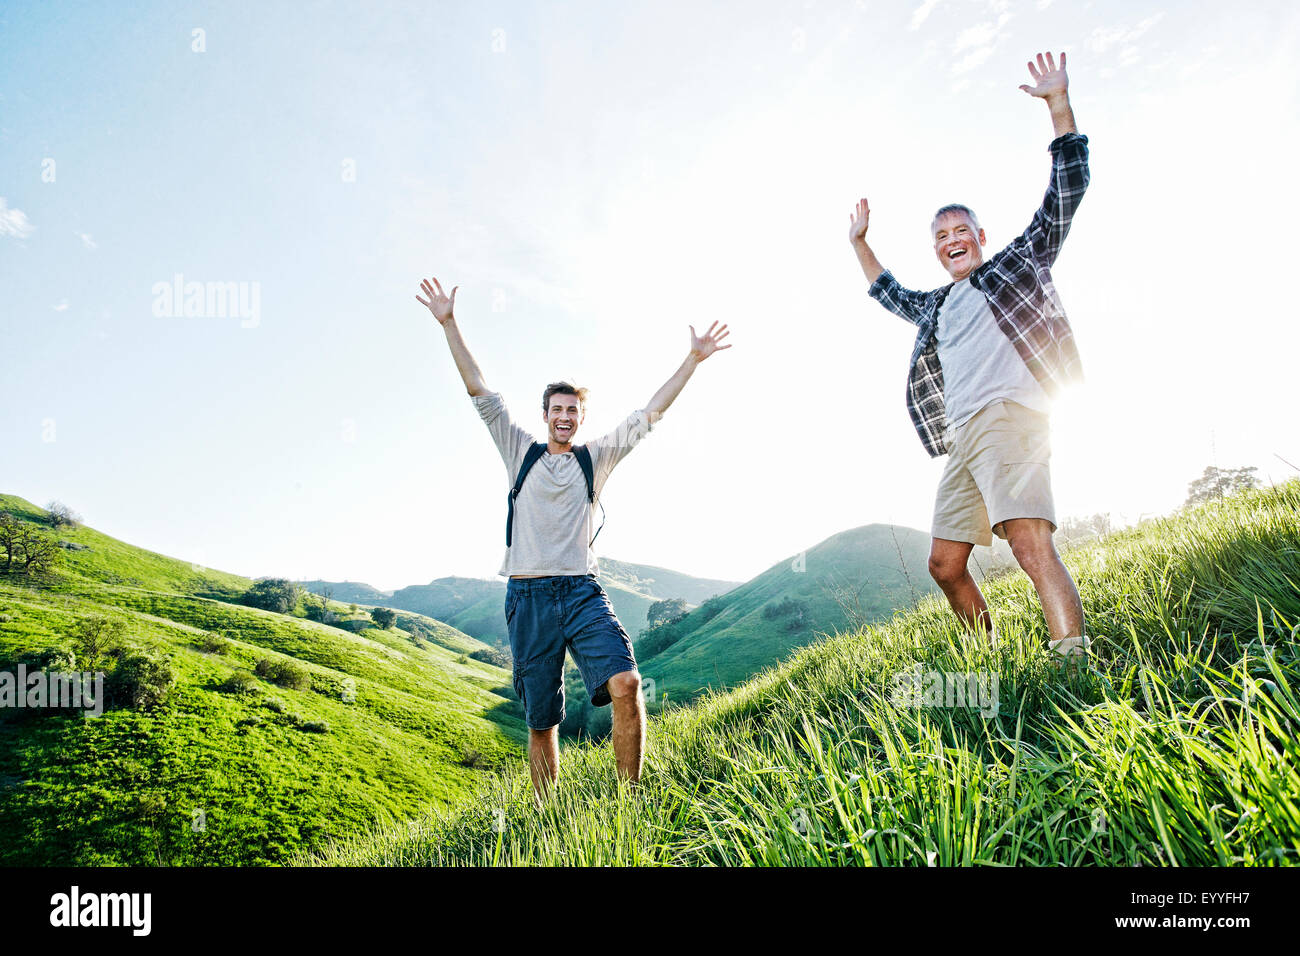 Caucasian father and son cheering on grassy hillside Stock Photo